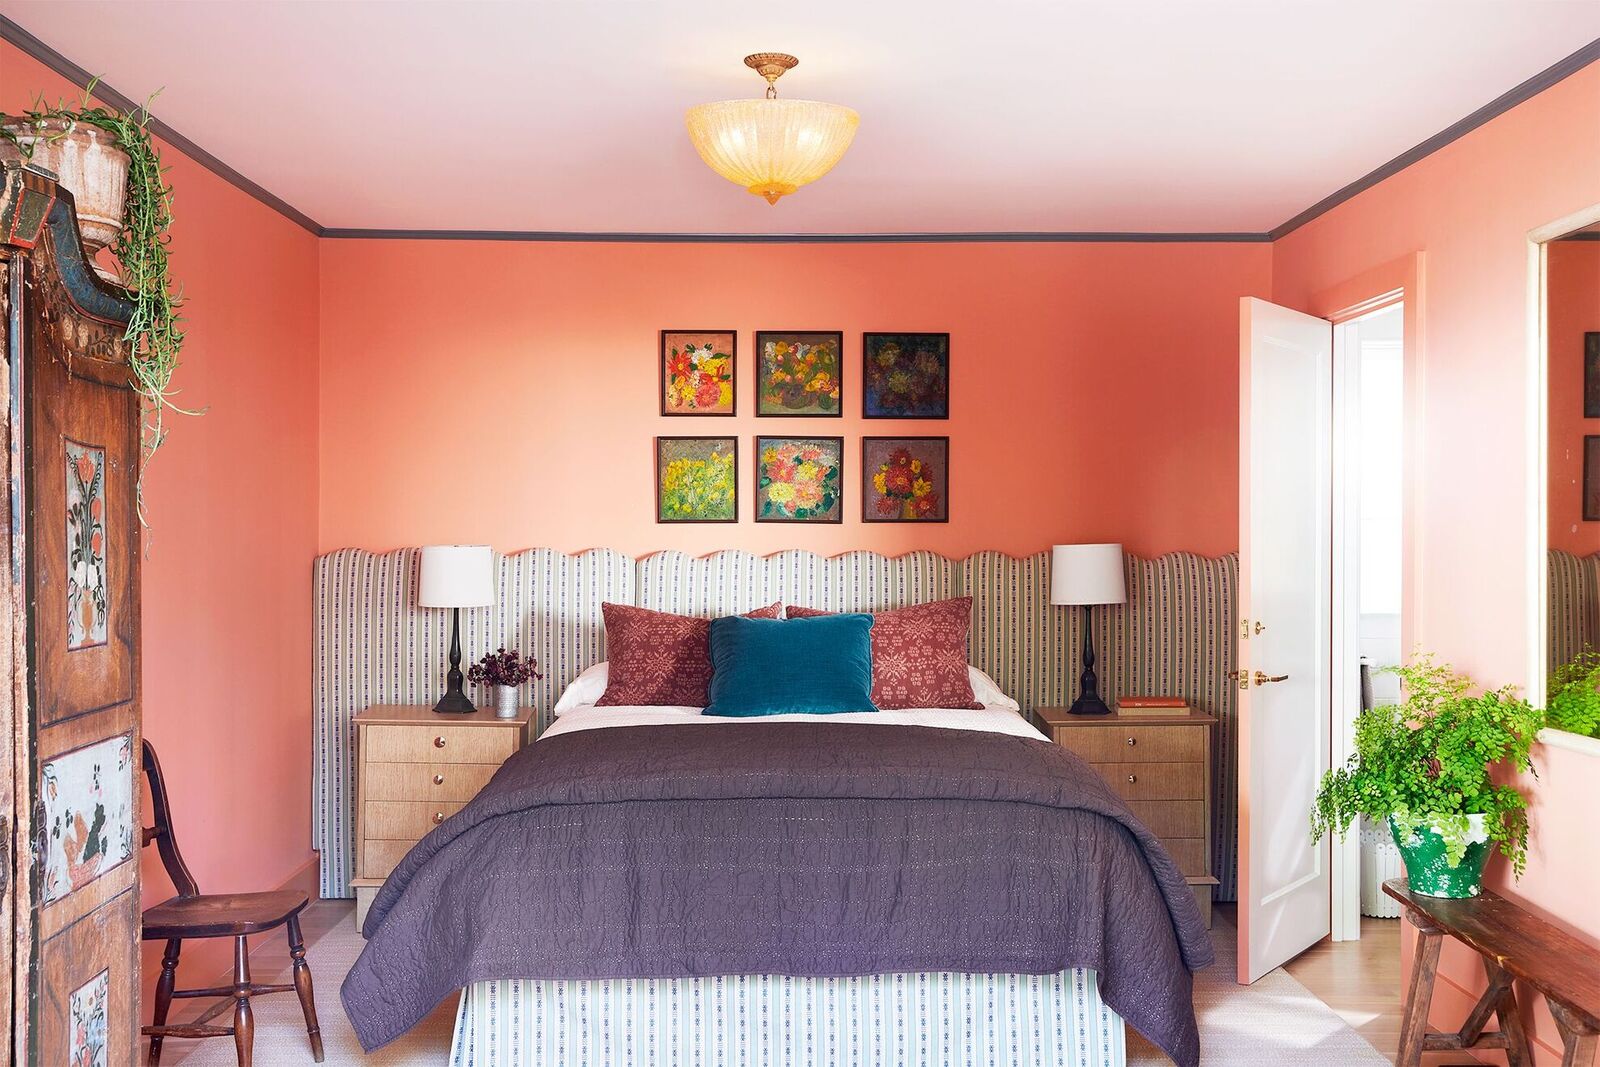 5 Best Colors To Paint A Small Bedroom, According To Experts